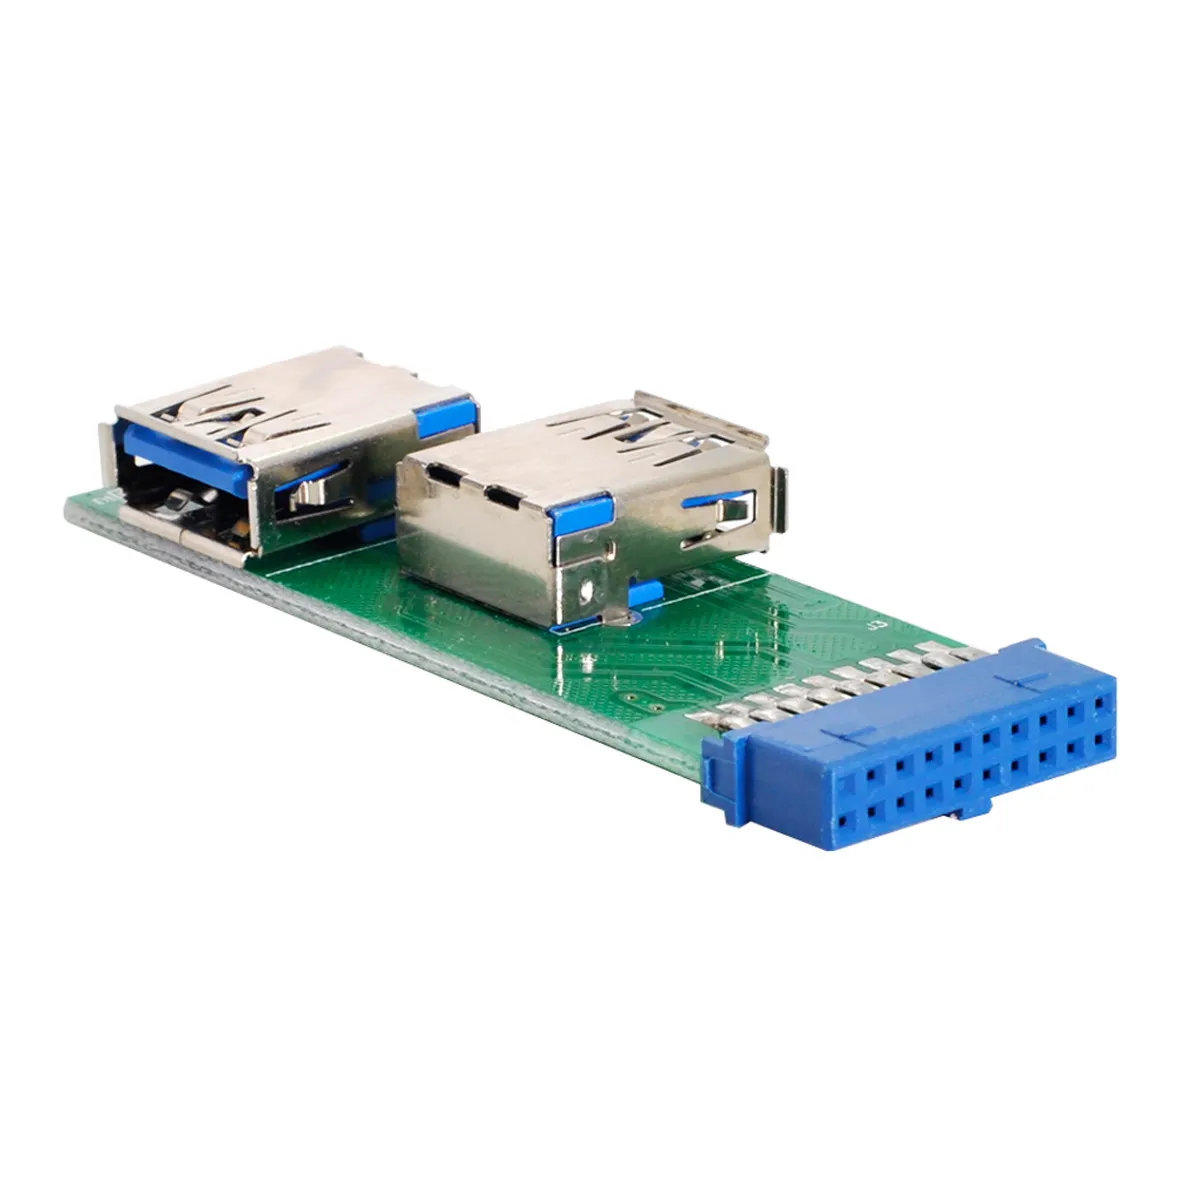 

Chenyang Dual Side USB 3.0 A Type Female to Motherboard 20Pin 19 Pin Box Header Slot Adapter PCBA with LED